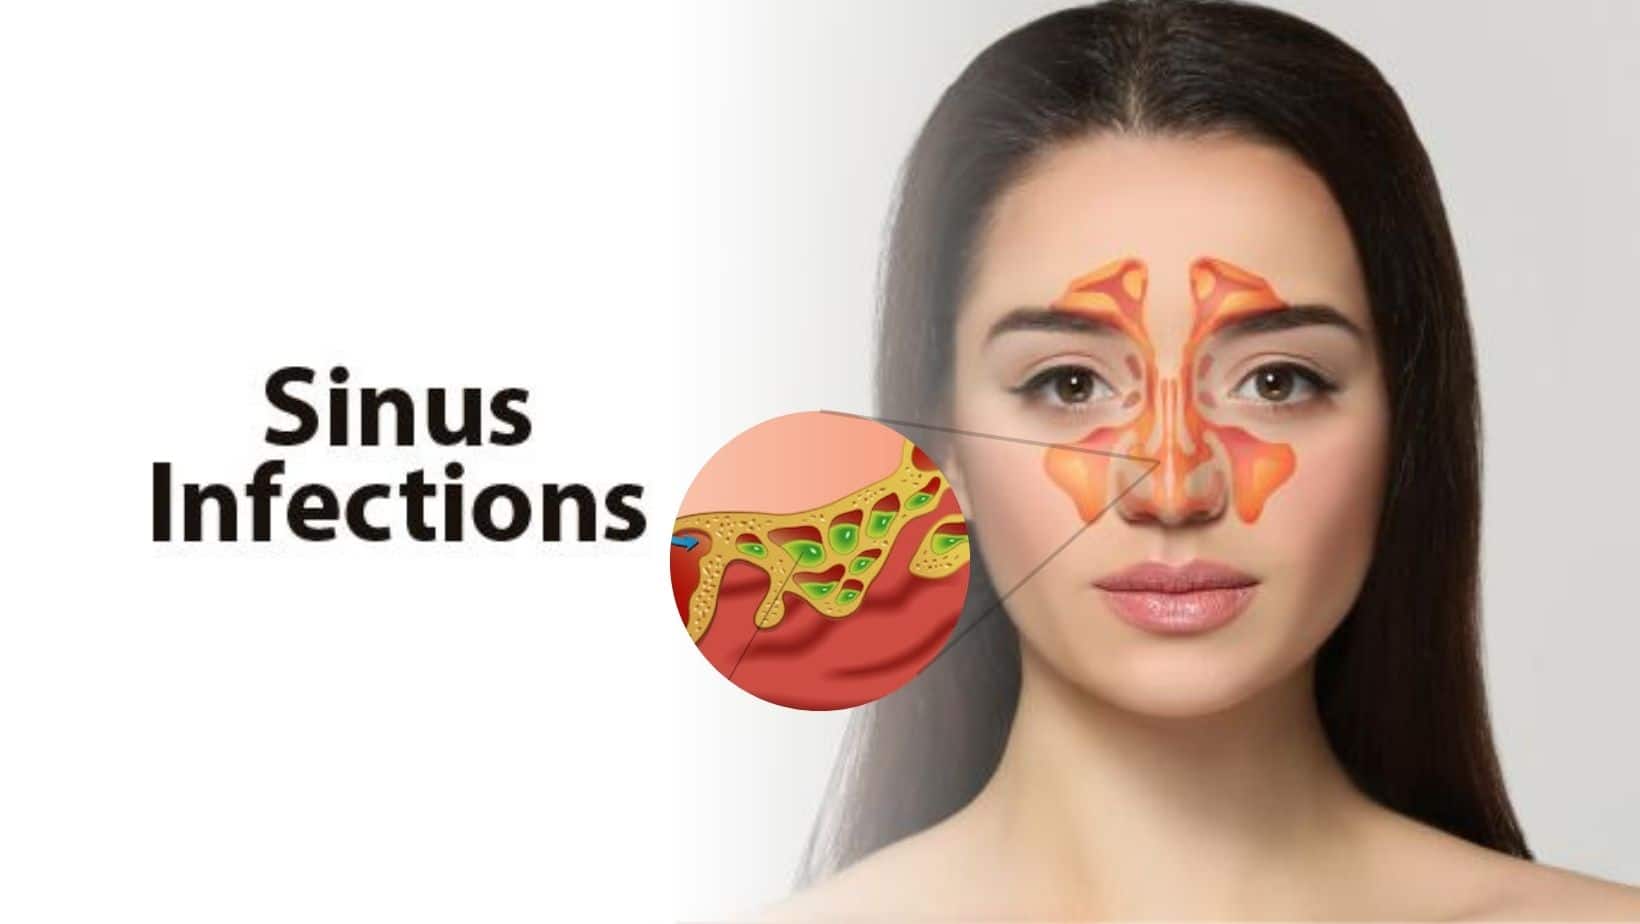 Sinus Infections: Are They Contagious? Common Myths Busted